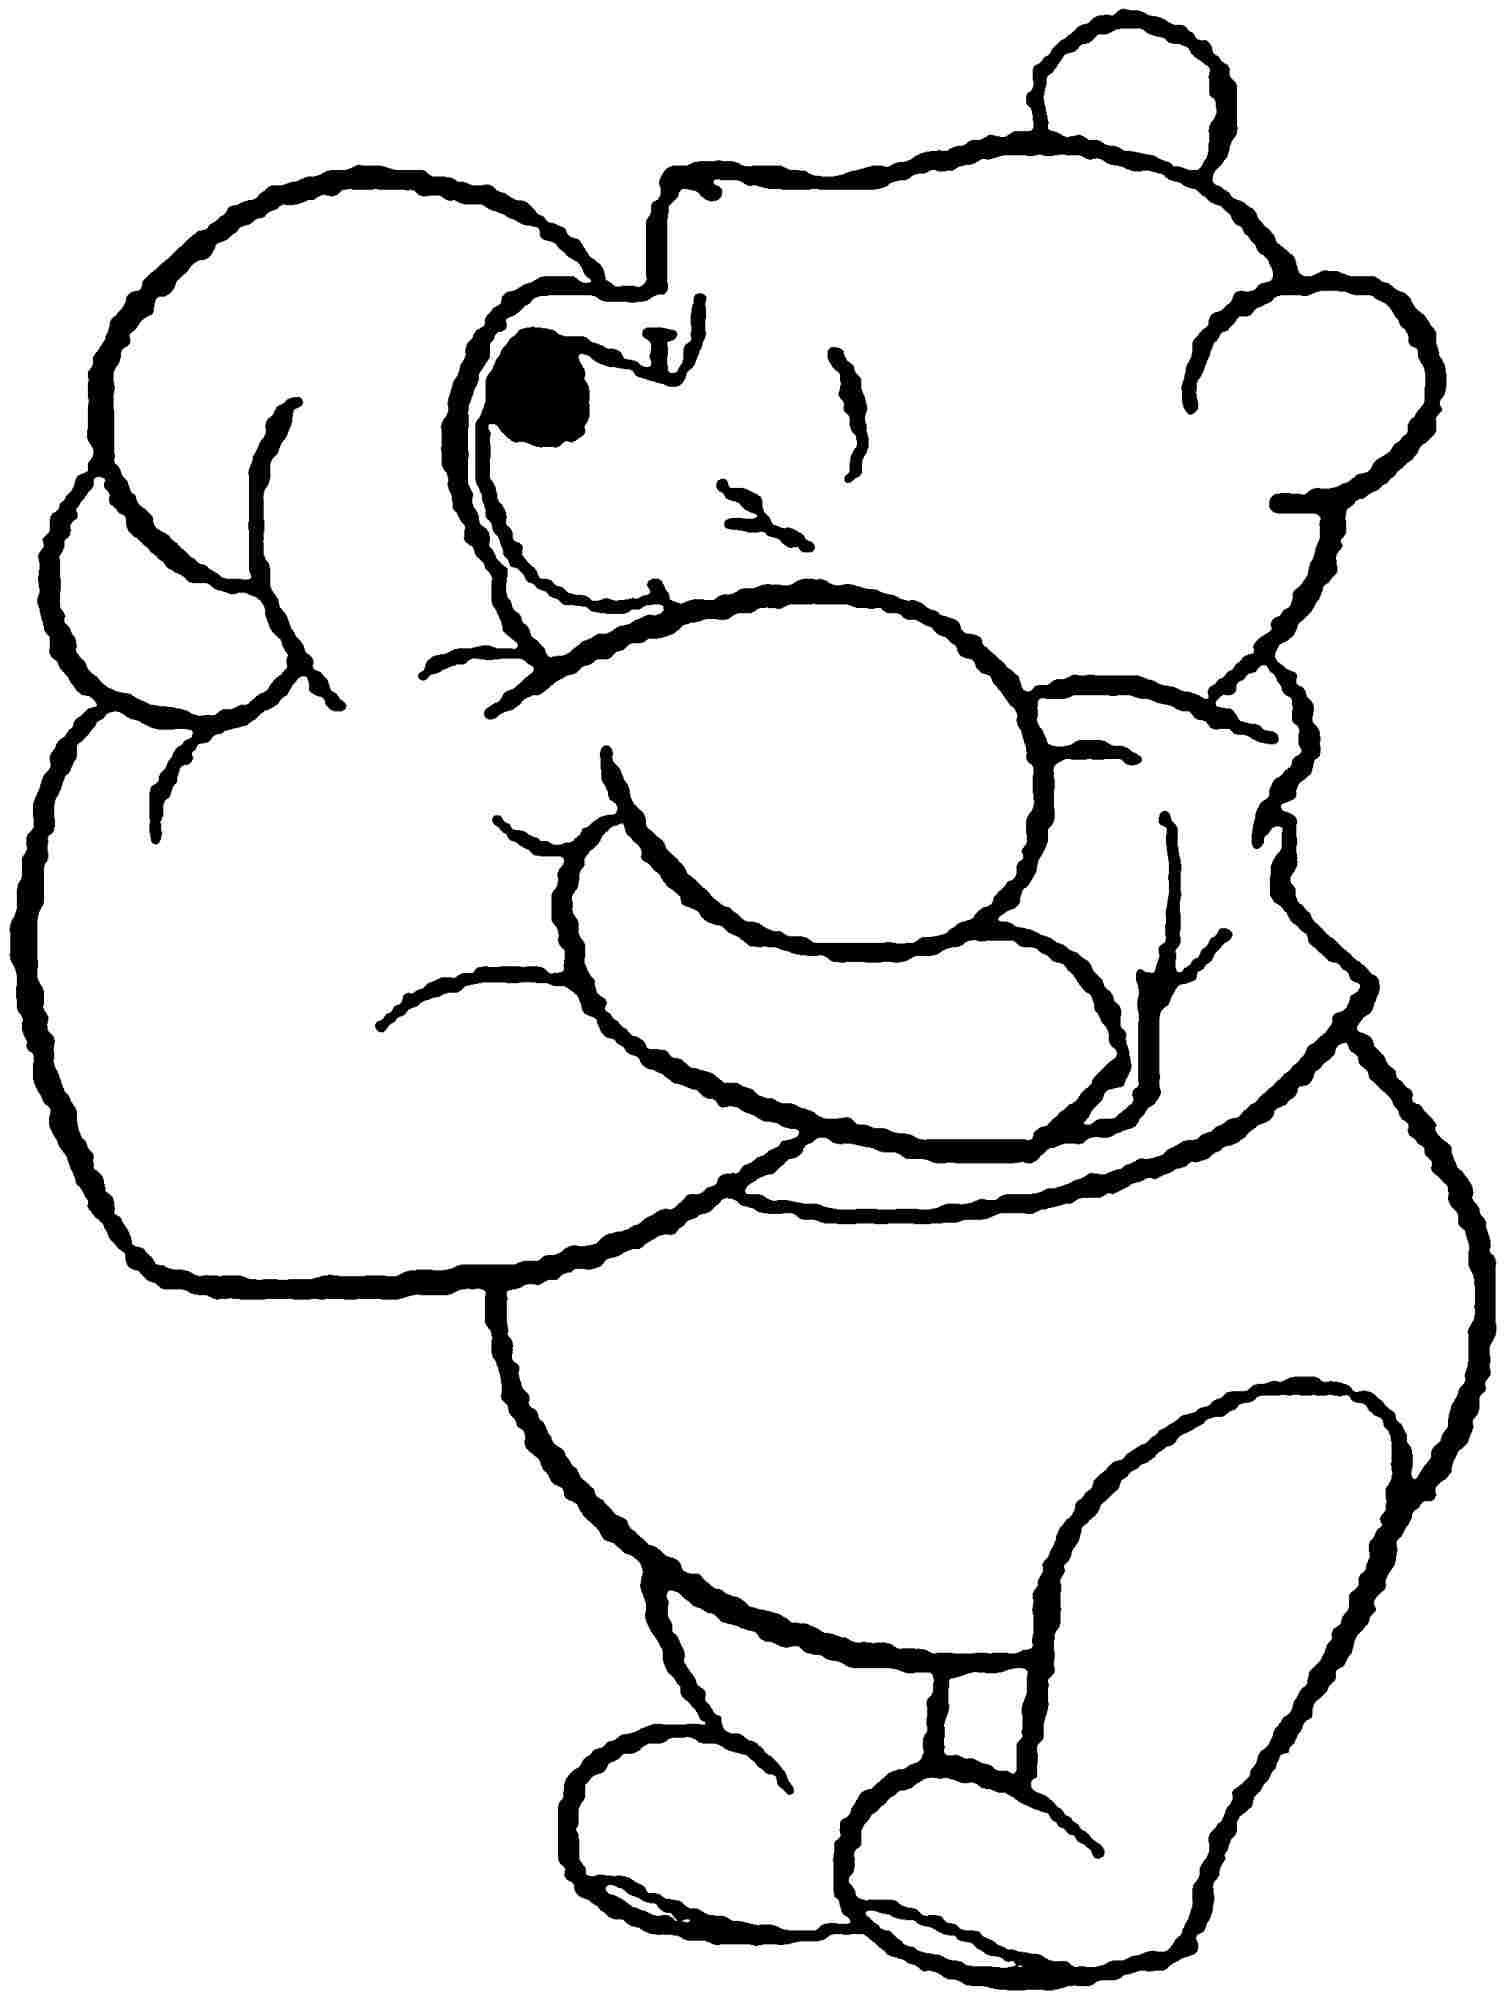 Cartoon Art Coloring Pages - Coloring Pages For All Ages